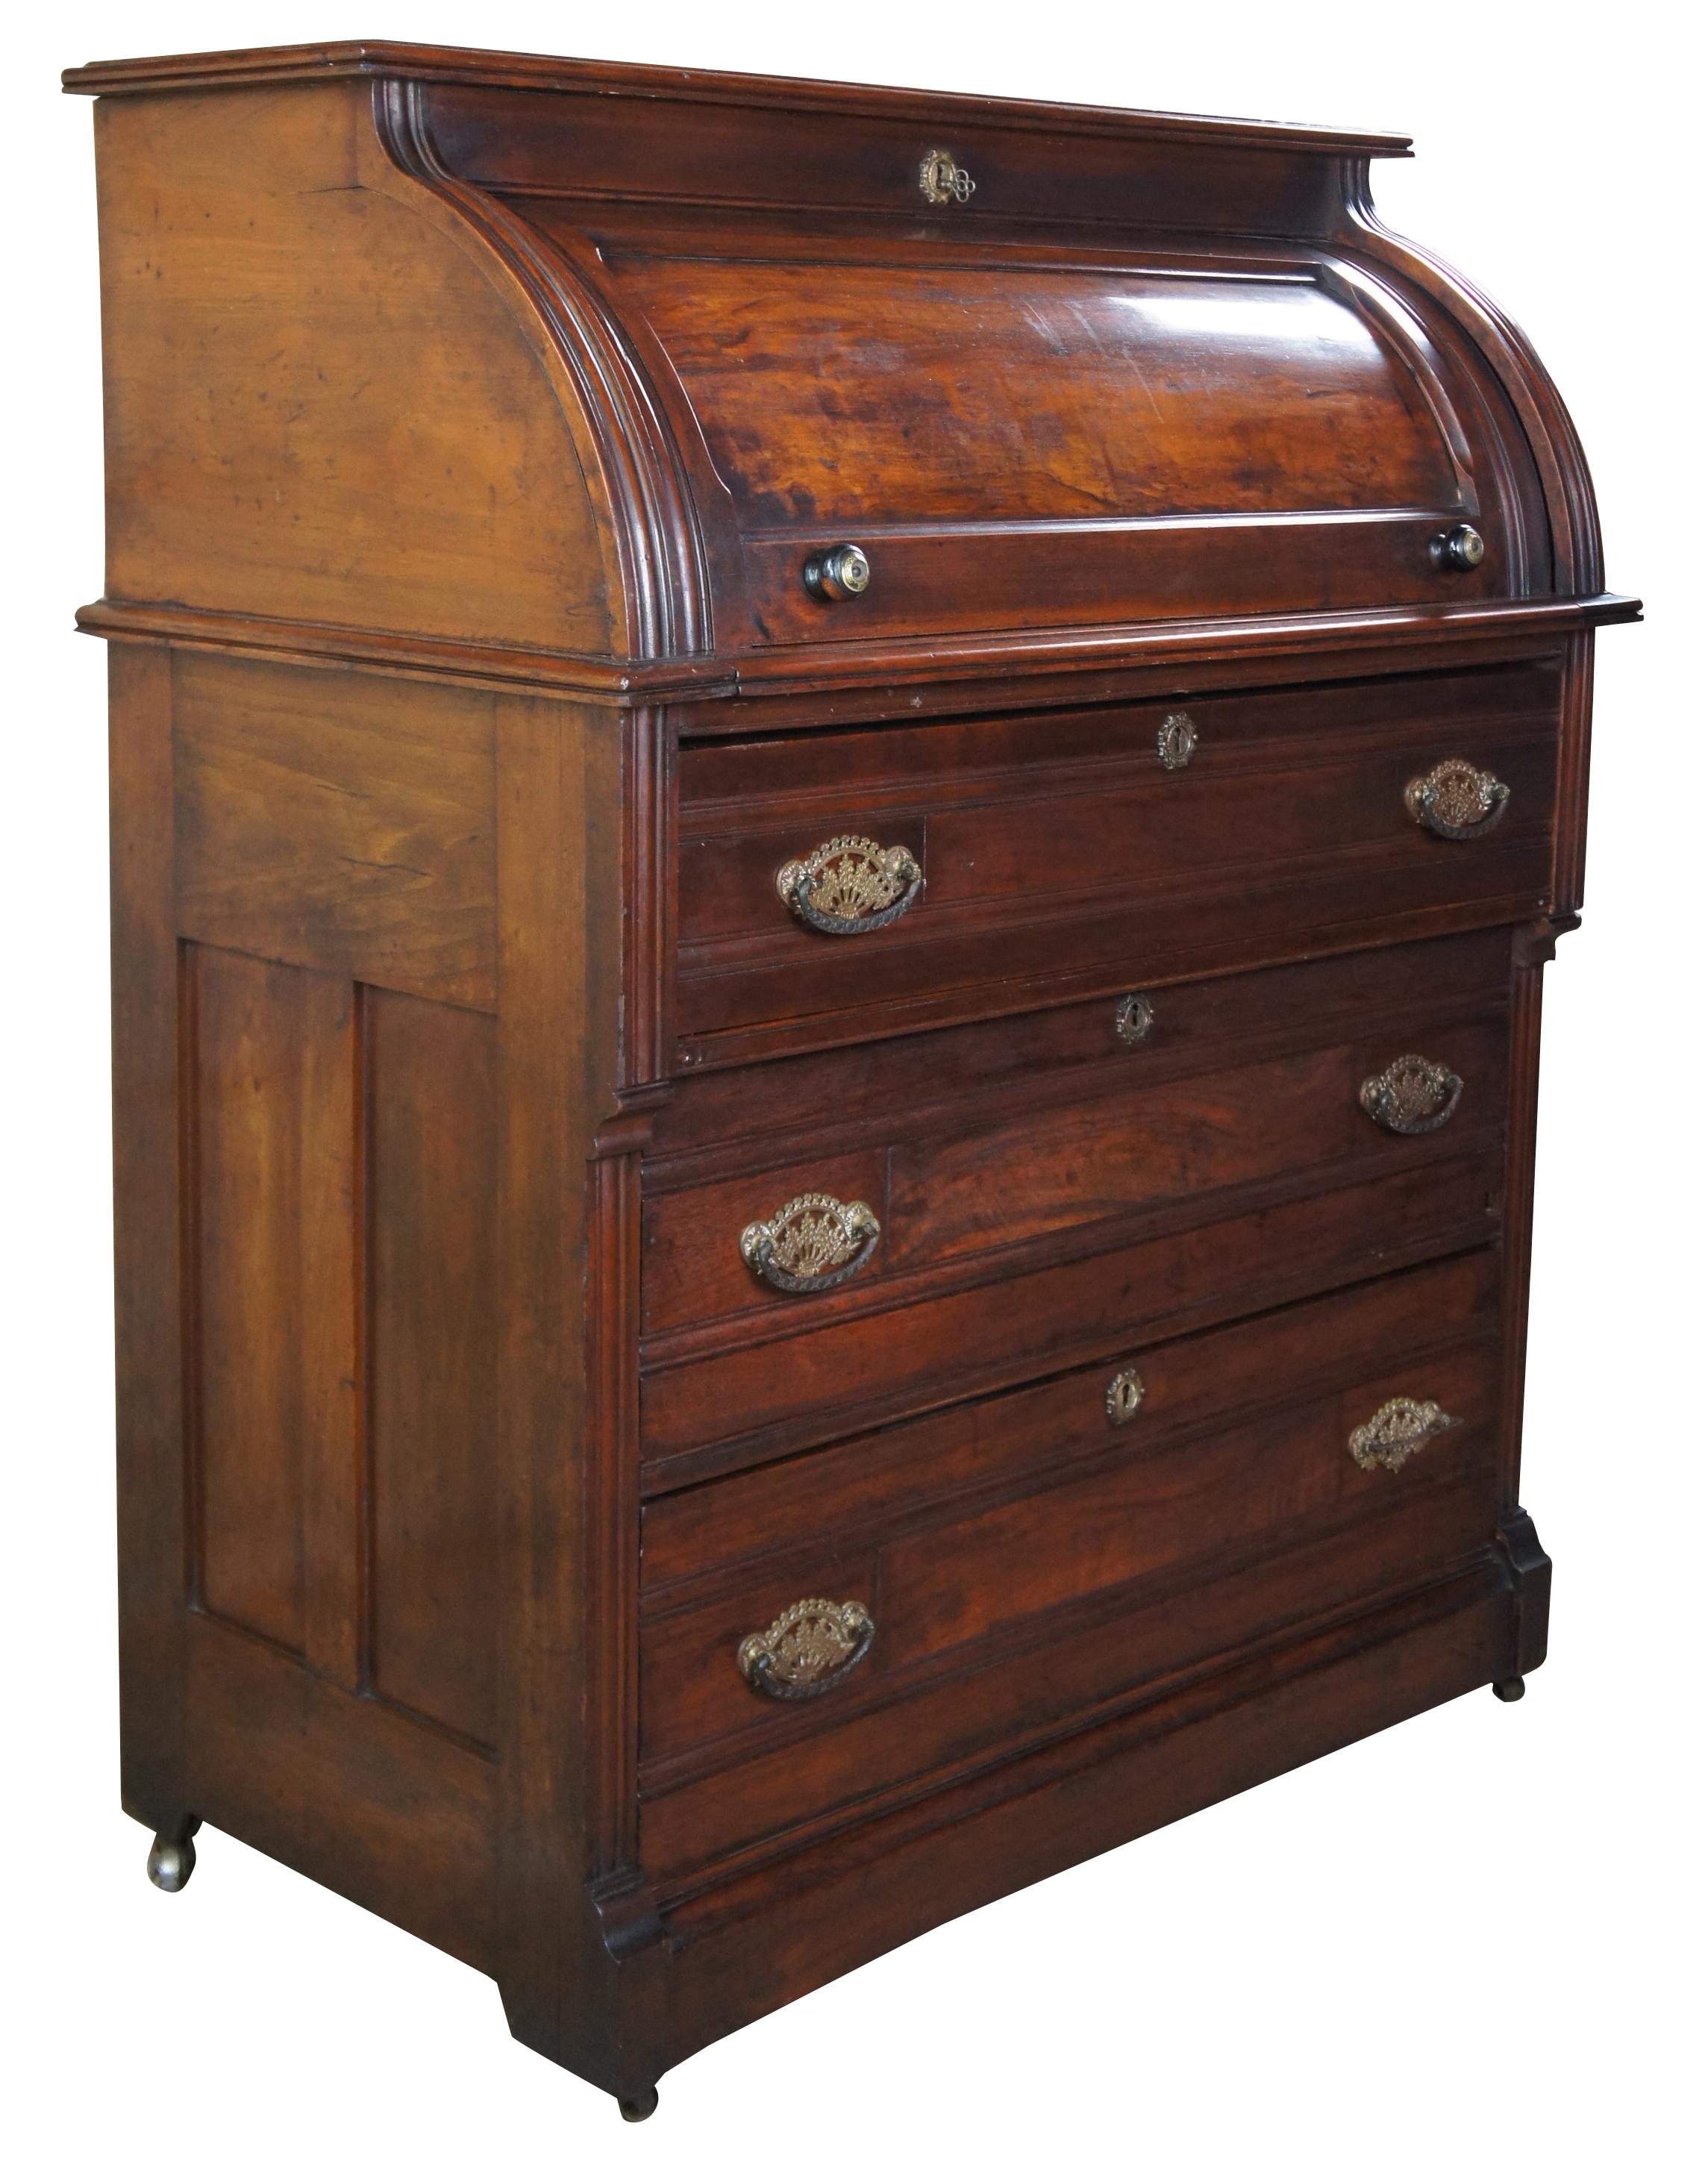 Antique Victorian period Eastlake cylinder roll top secretary writing desk, circa 1880s. Made of walnut featuring lower chest with three drawers, a half cylinder roll top that opens to pullout writing surface with multiple drawers and cubbies, and